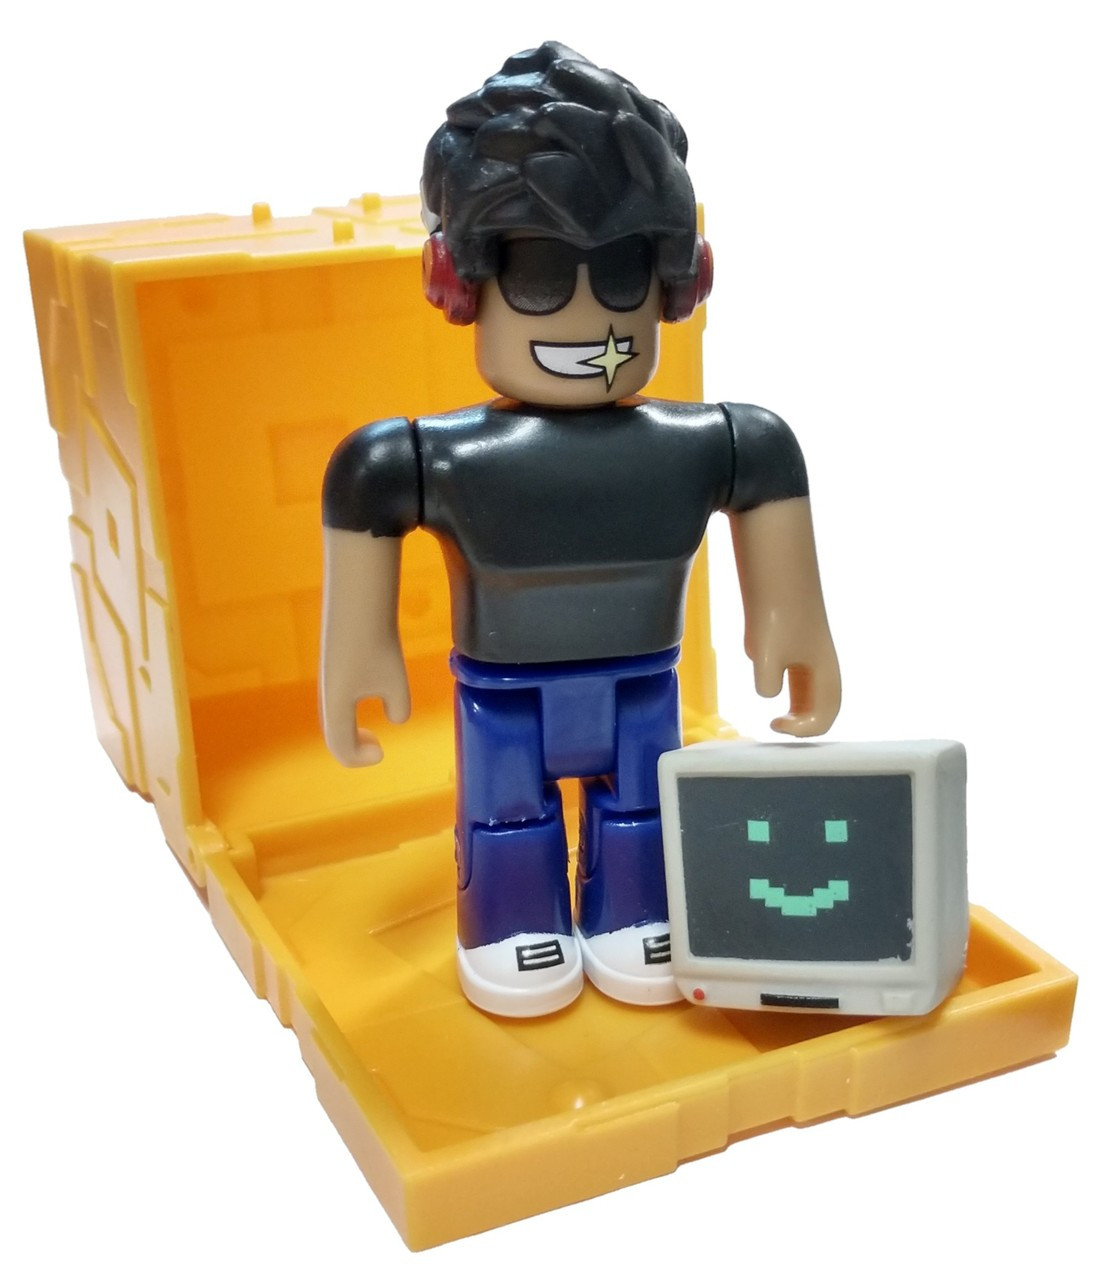 Roblox Series 5 Simbuilder 3 Mini Figure With Gold Cube And Online Code Loose Jazwares Toywiz - audio roblox mini figure with unused virtual code gold